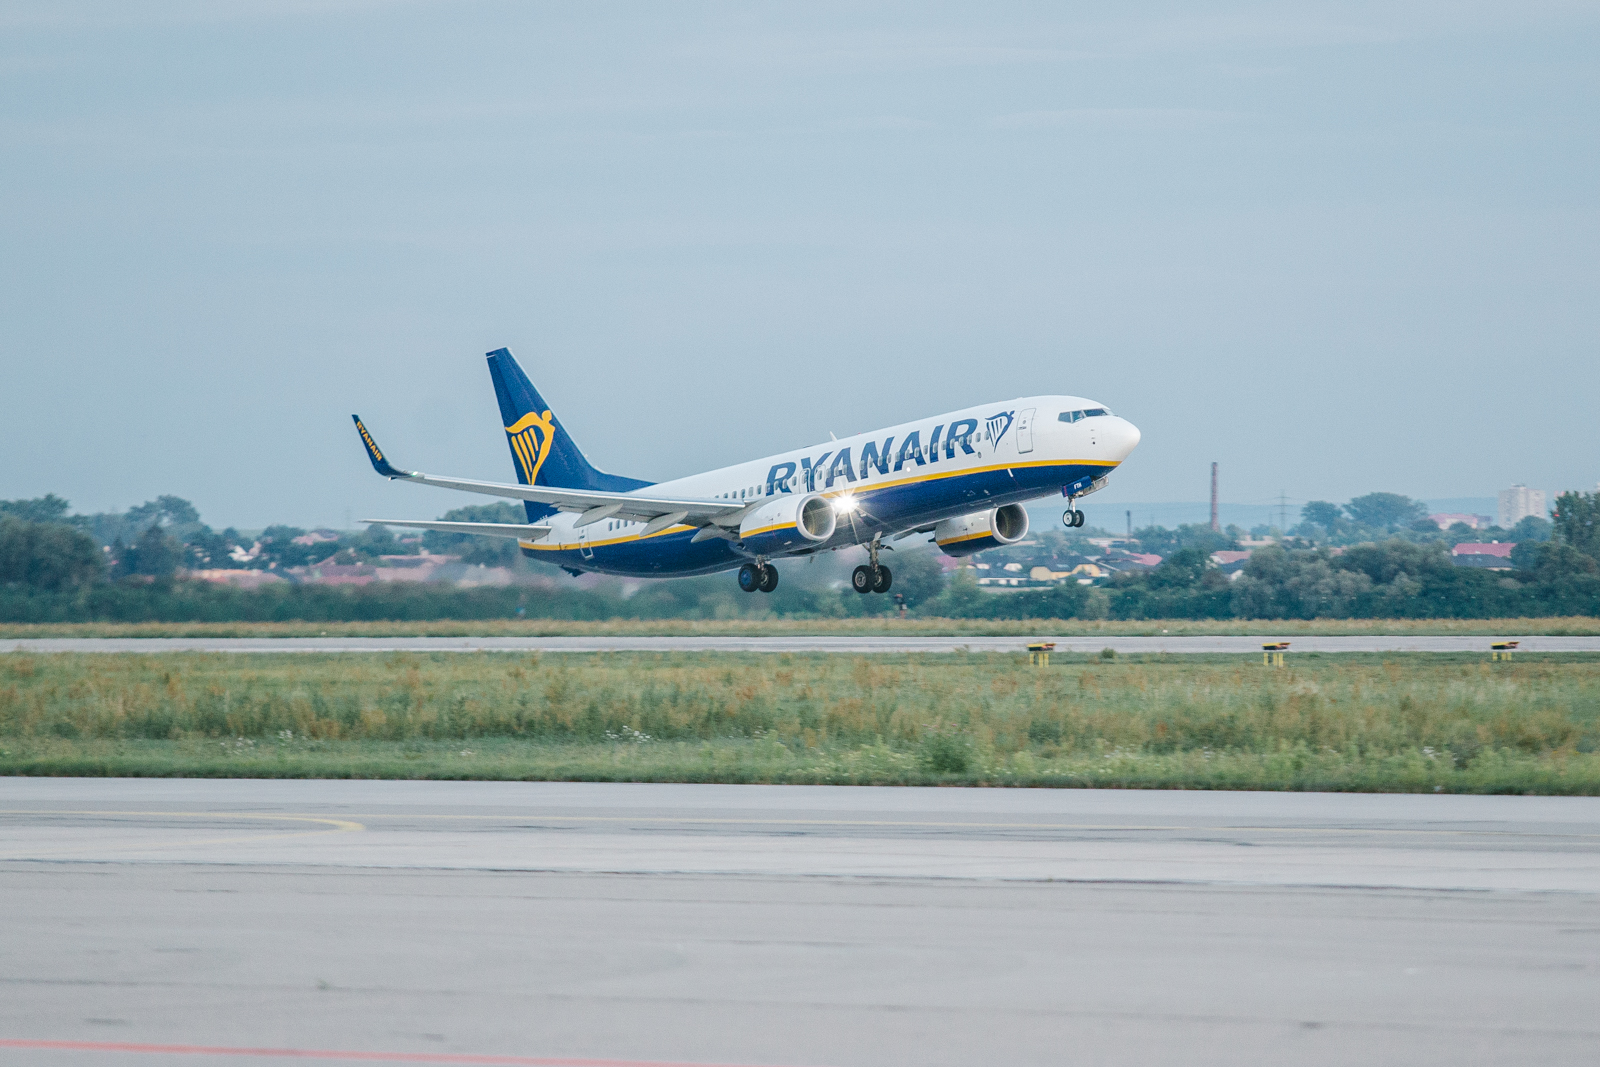 Ryanair And Balpa Sign UK Recognition Agreement – UK Accounts For 25% Of Ryanair’s Fleet And Pilots